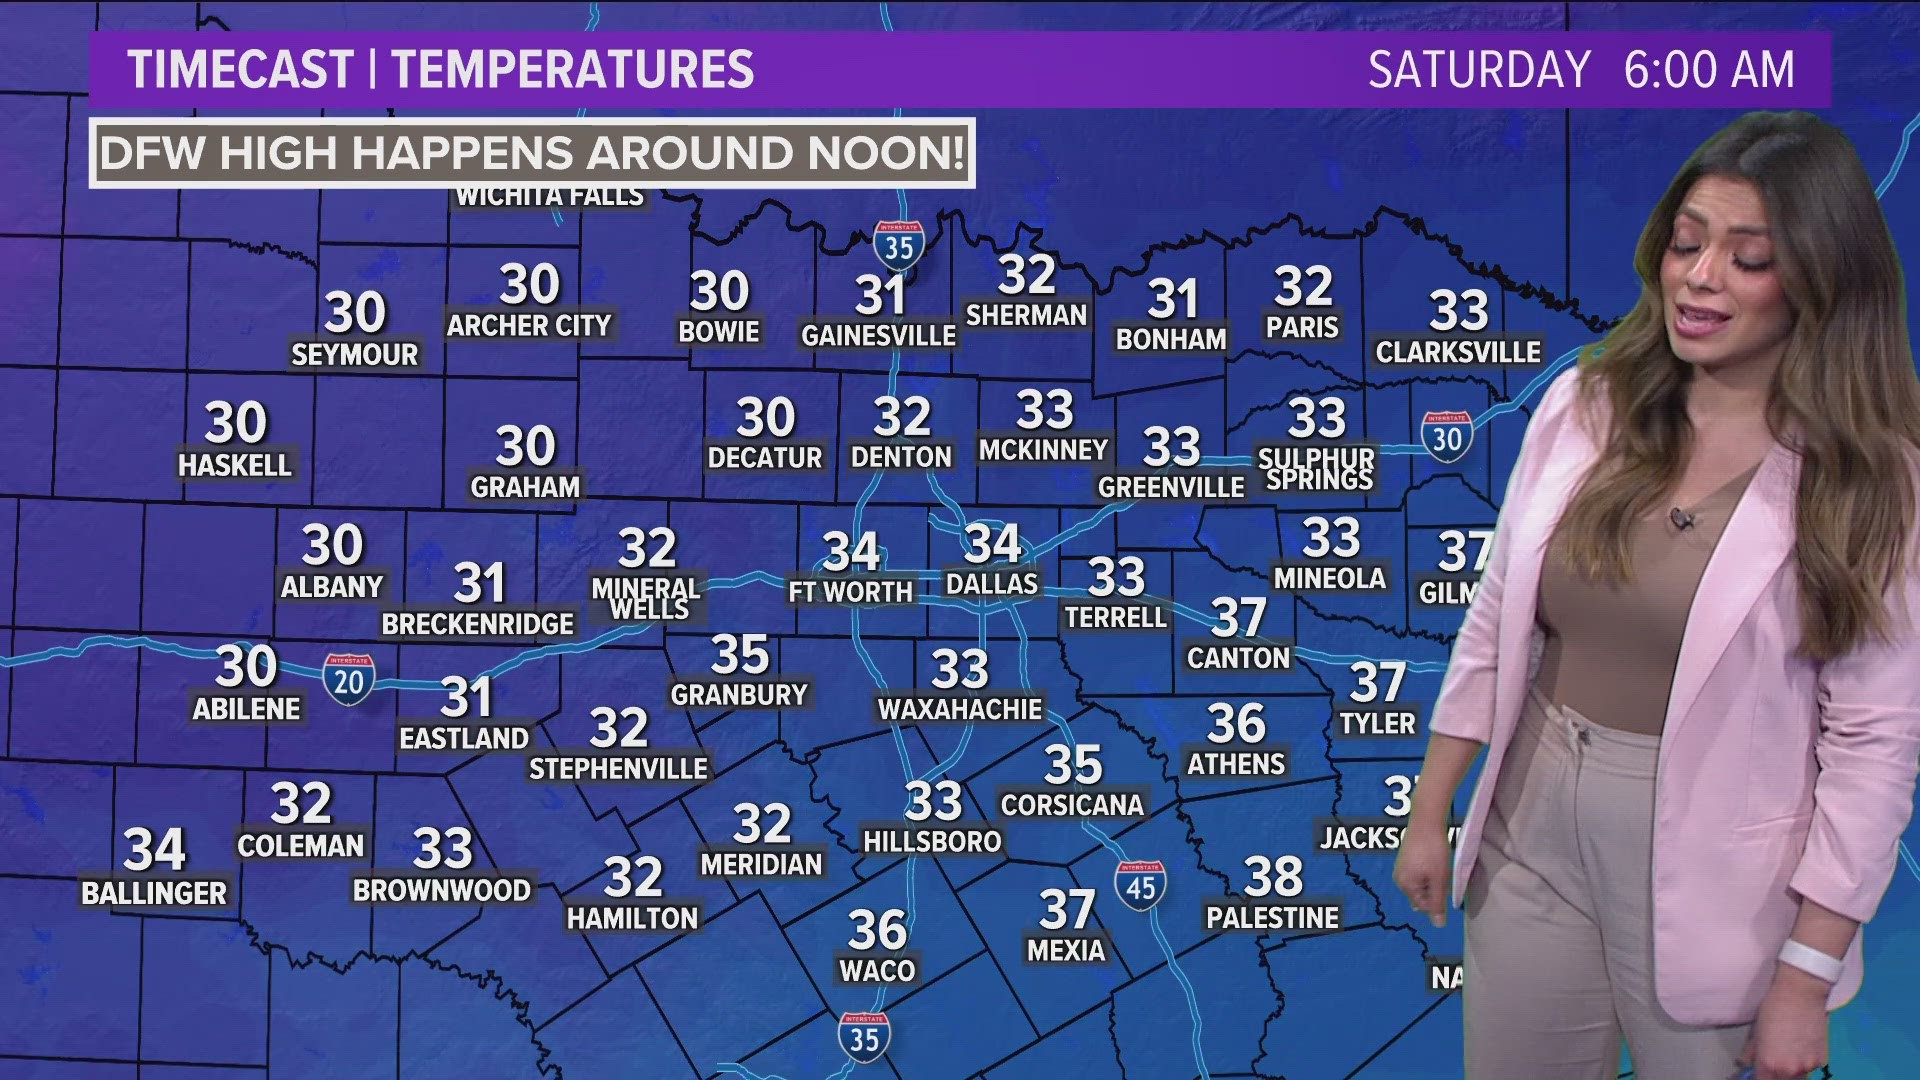 DFW Weather: Winter returns for the weekend - here's how cold it will get